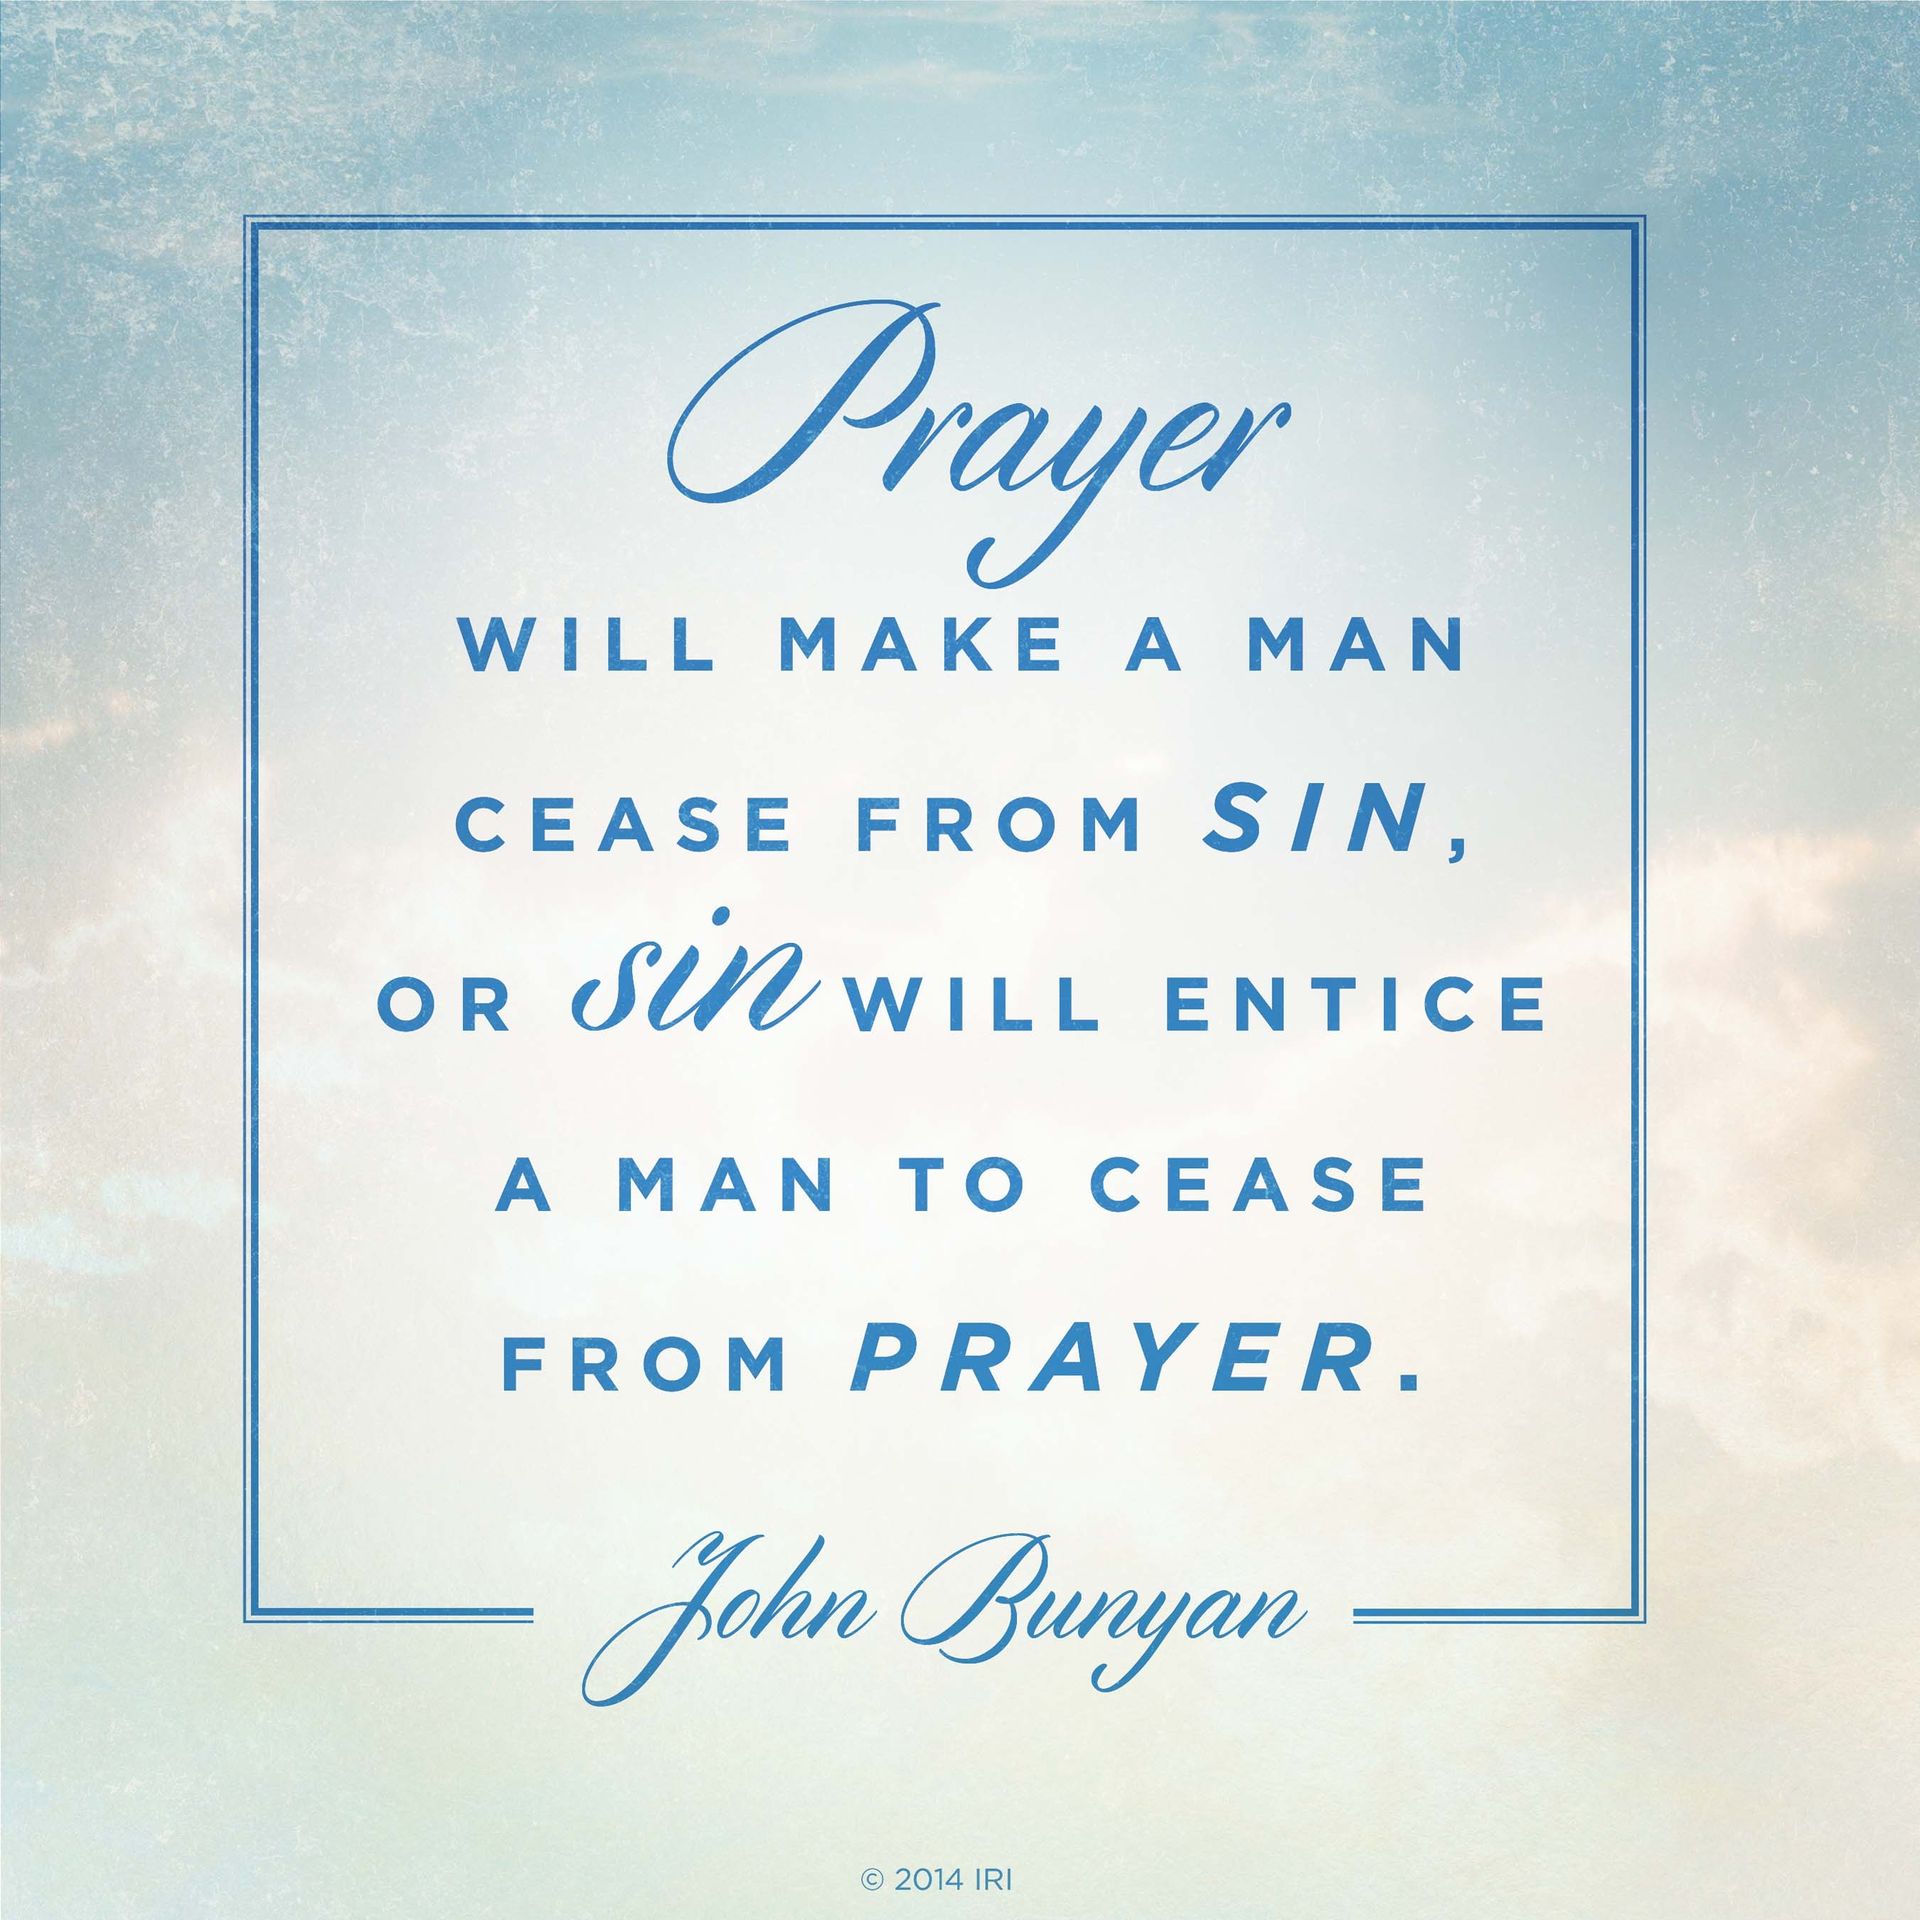 “Prayer will make a man cease from sin, or sin will entice a man to cease from prayer.”—John Bunyan